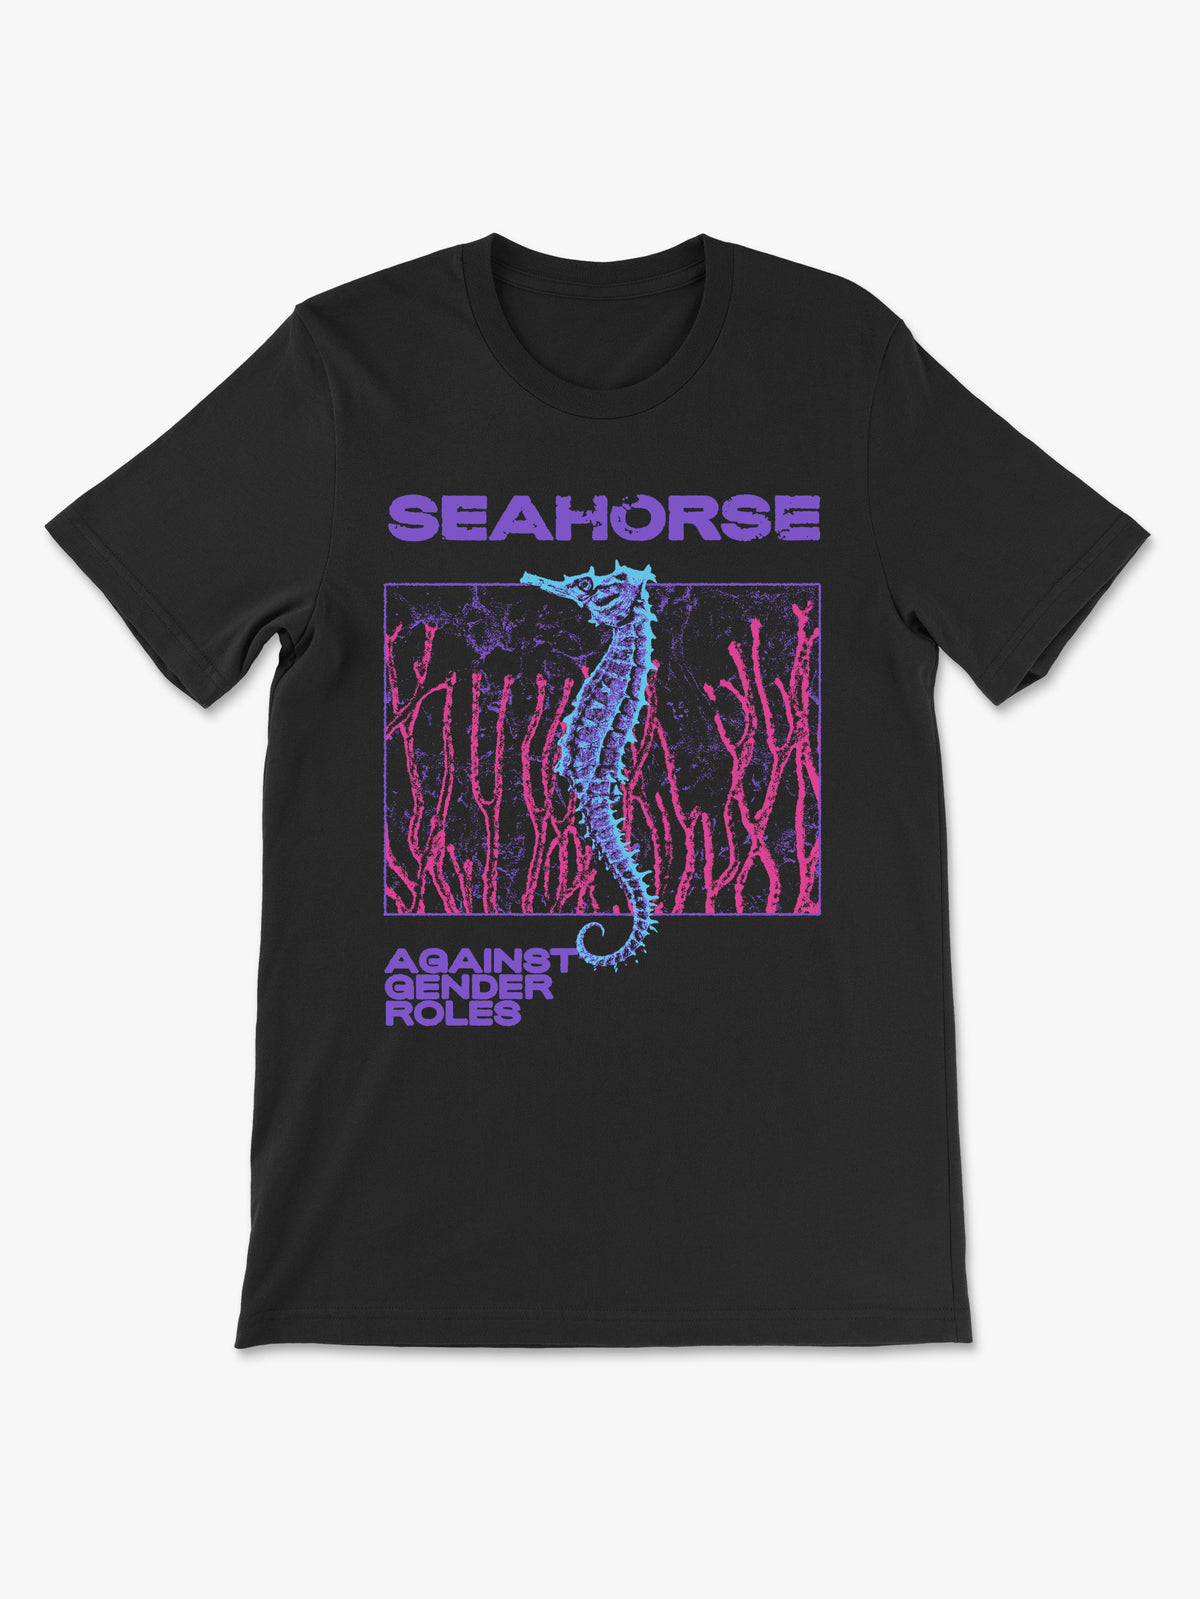 Seahorse Against Gender Roles by kushmere juice